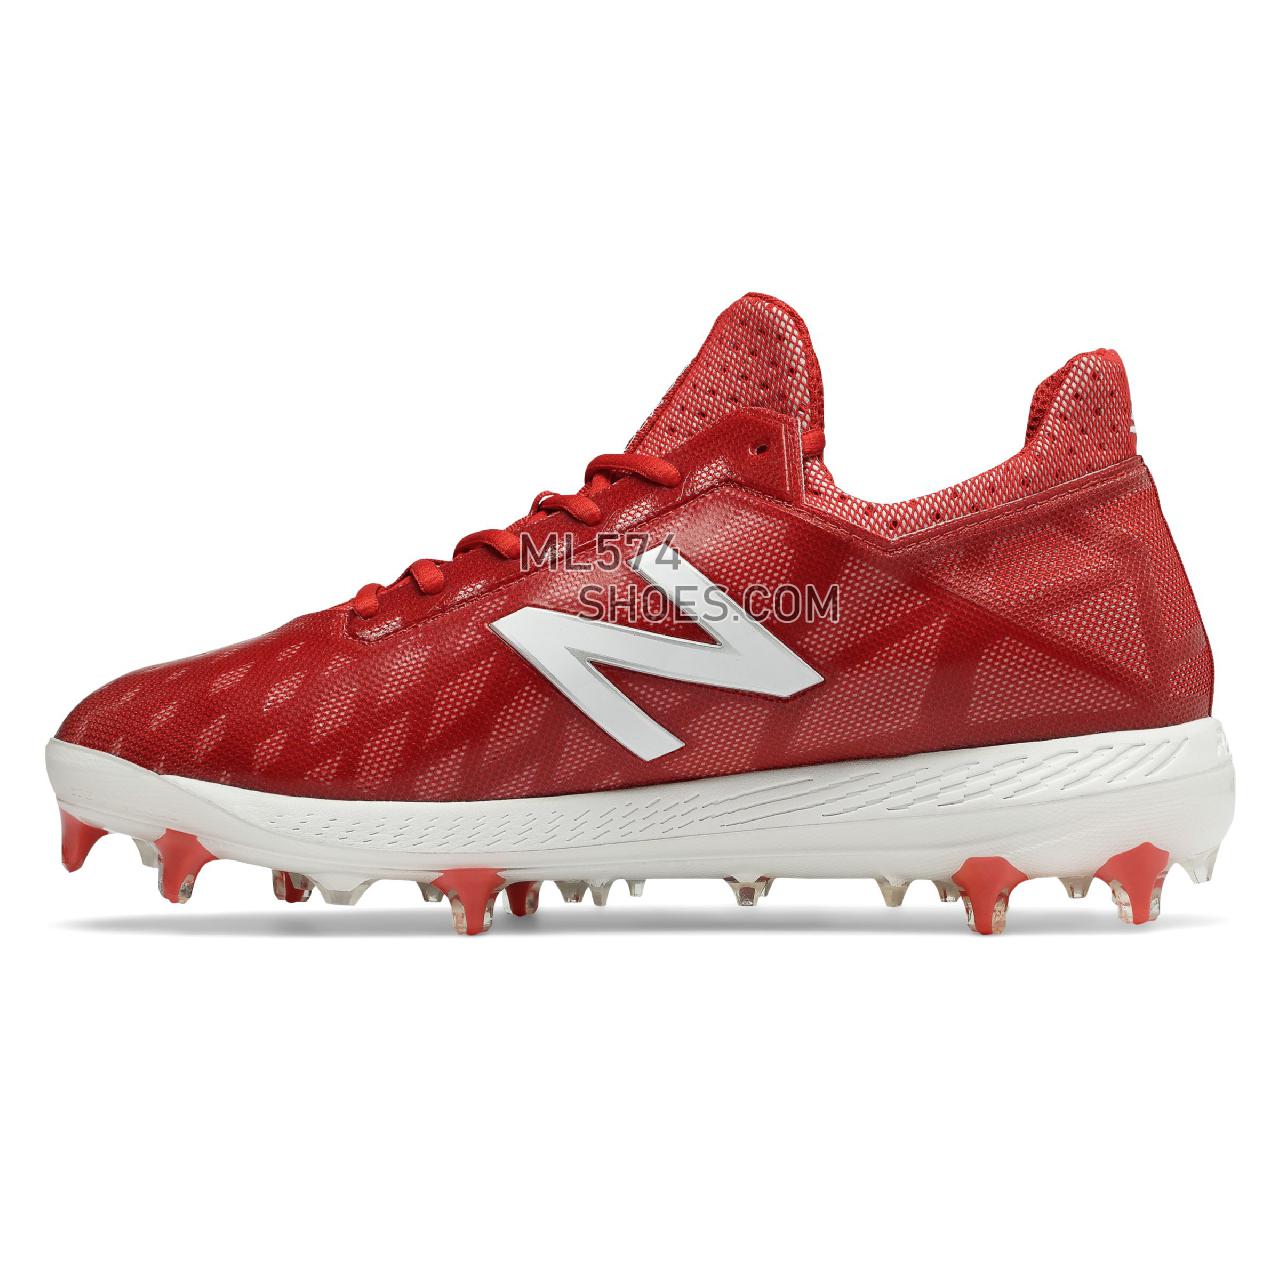 New Balance COMPv1 - Men's 1 - Baseball Red with White - COMPTR1